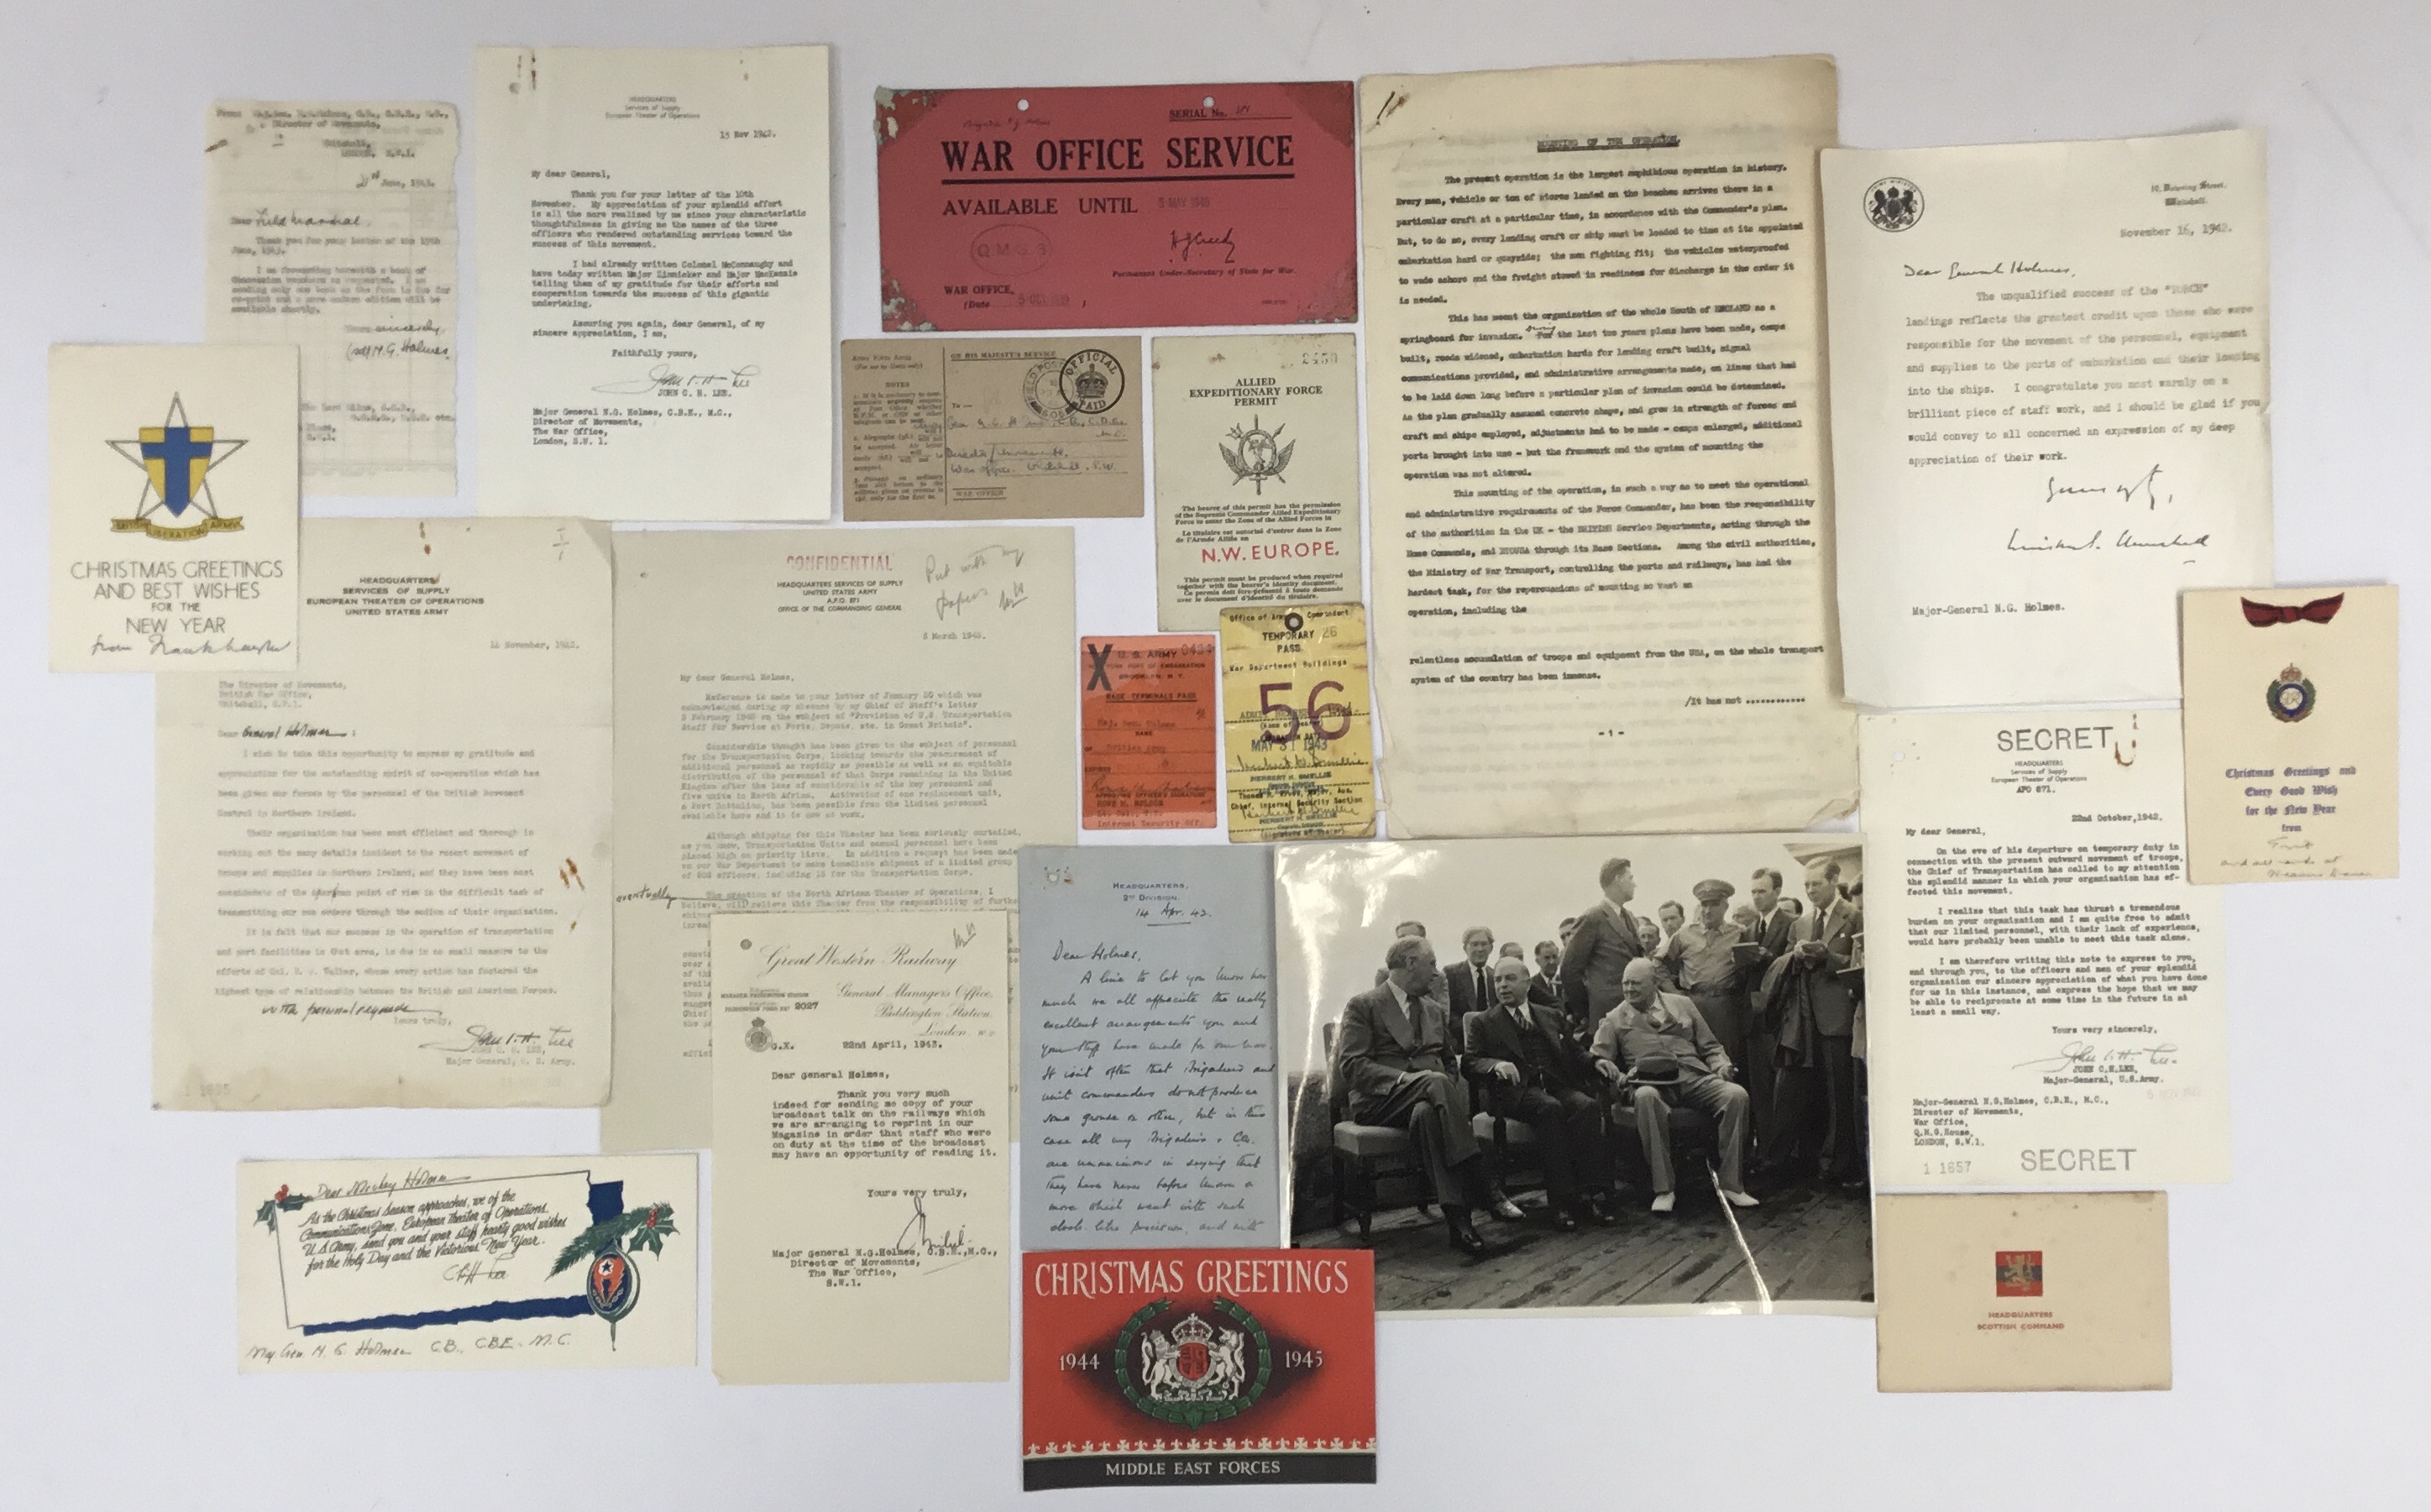 A large archive of WW2 era letters, documents, passes and other ephemera related to Major General